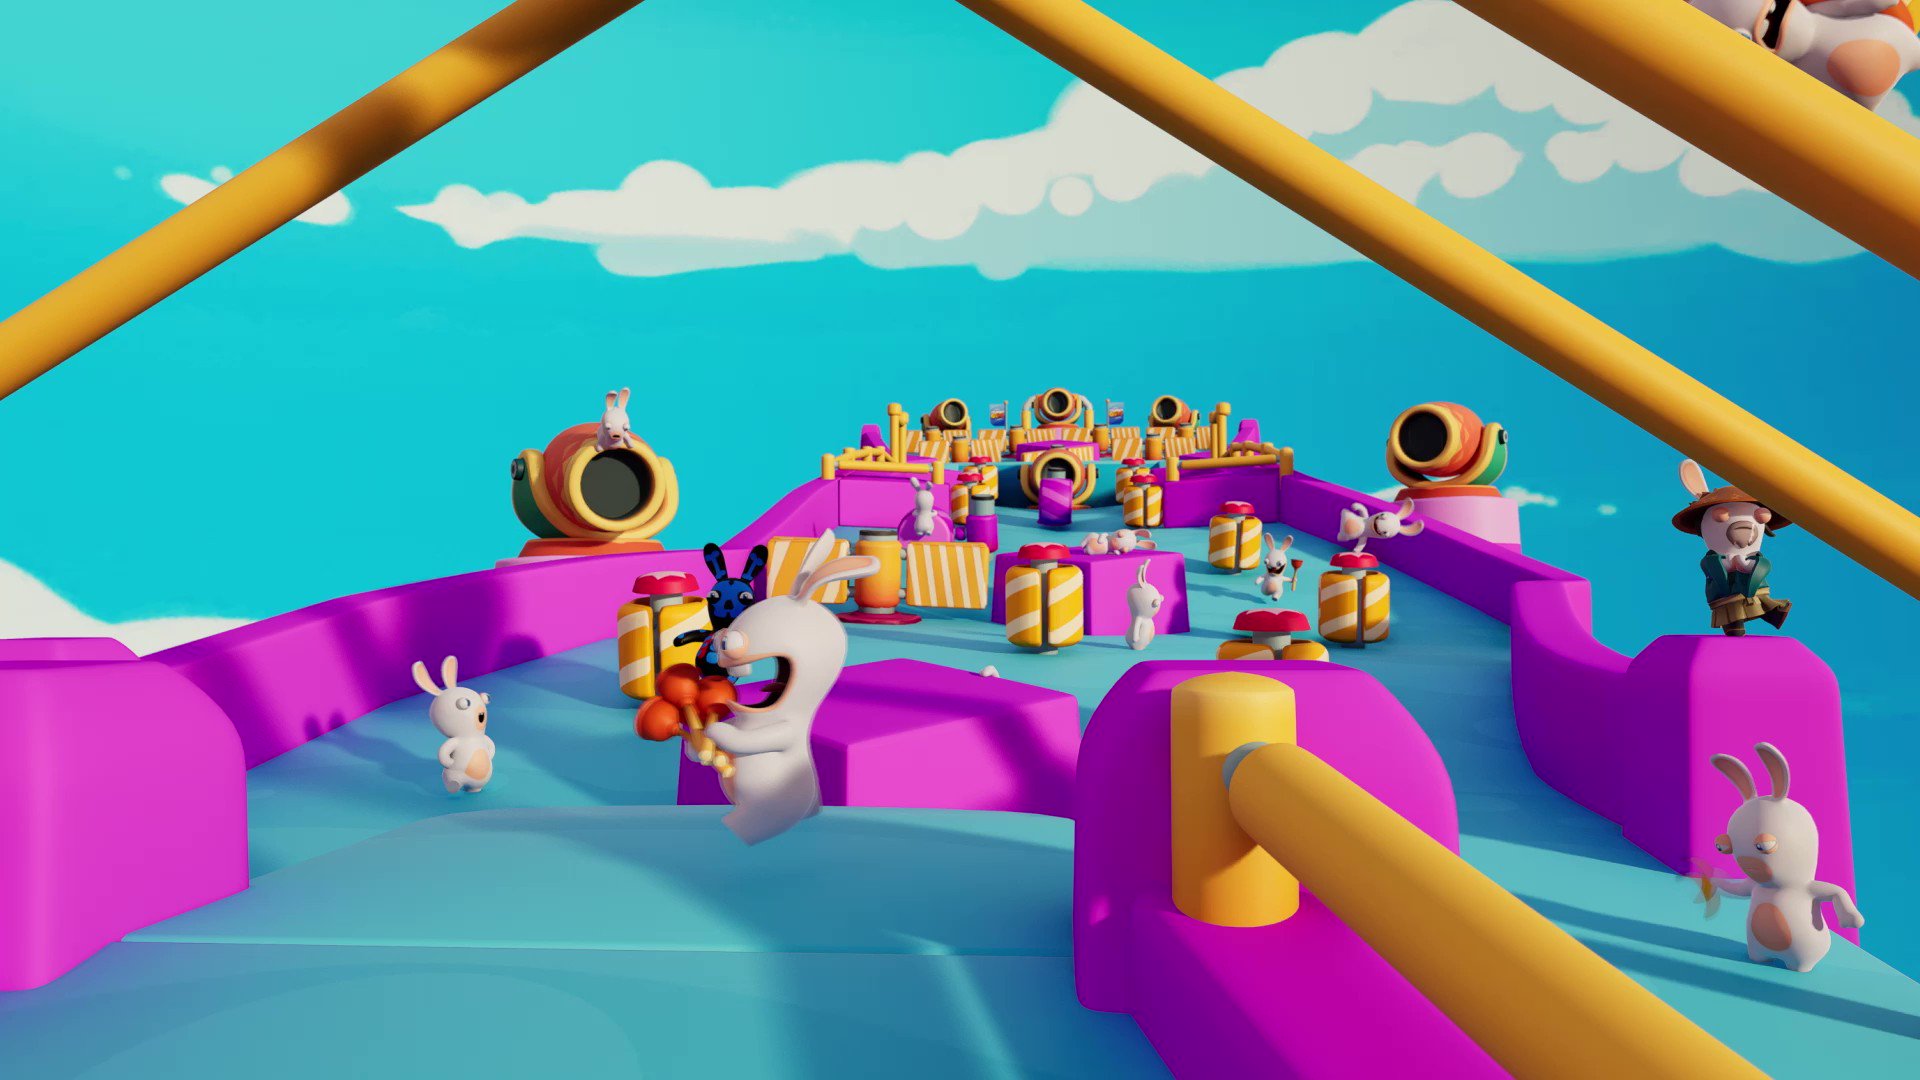 Stumble Guys” unleashes Ubisoft's Rabbids in a wild new takeover event